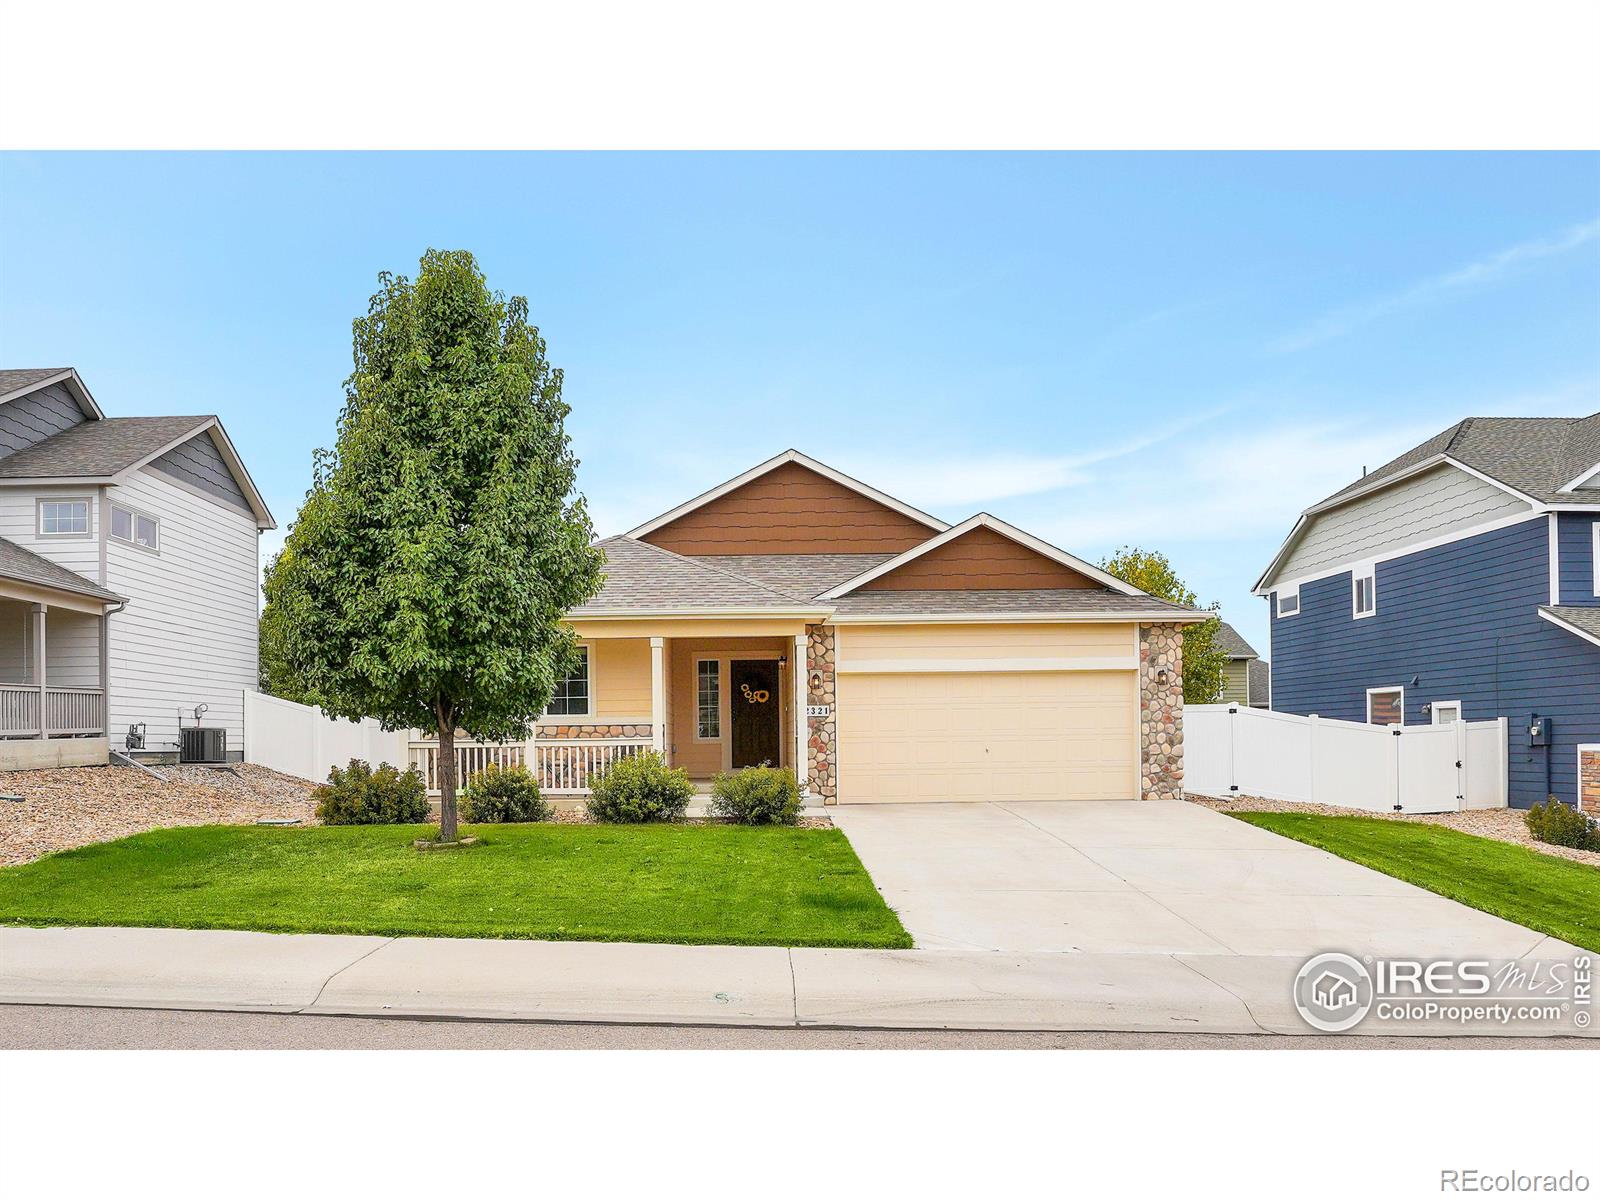 2321  76th Ave Ct, greeley MLS: 456789998289 Beds: 3 Baths: 2 Price: $455,000